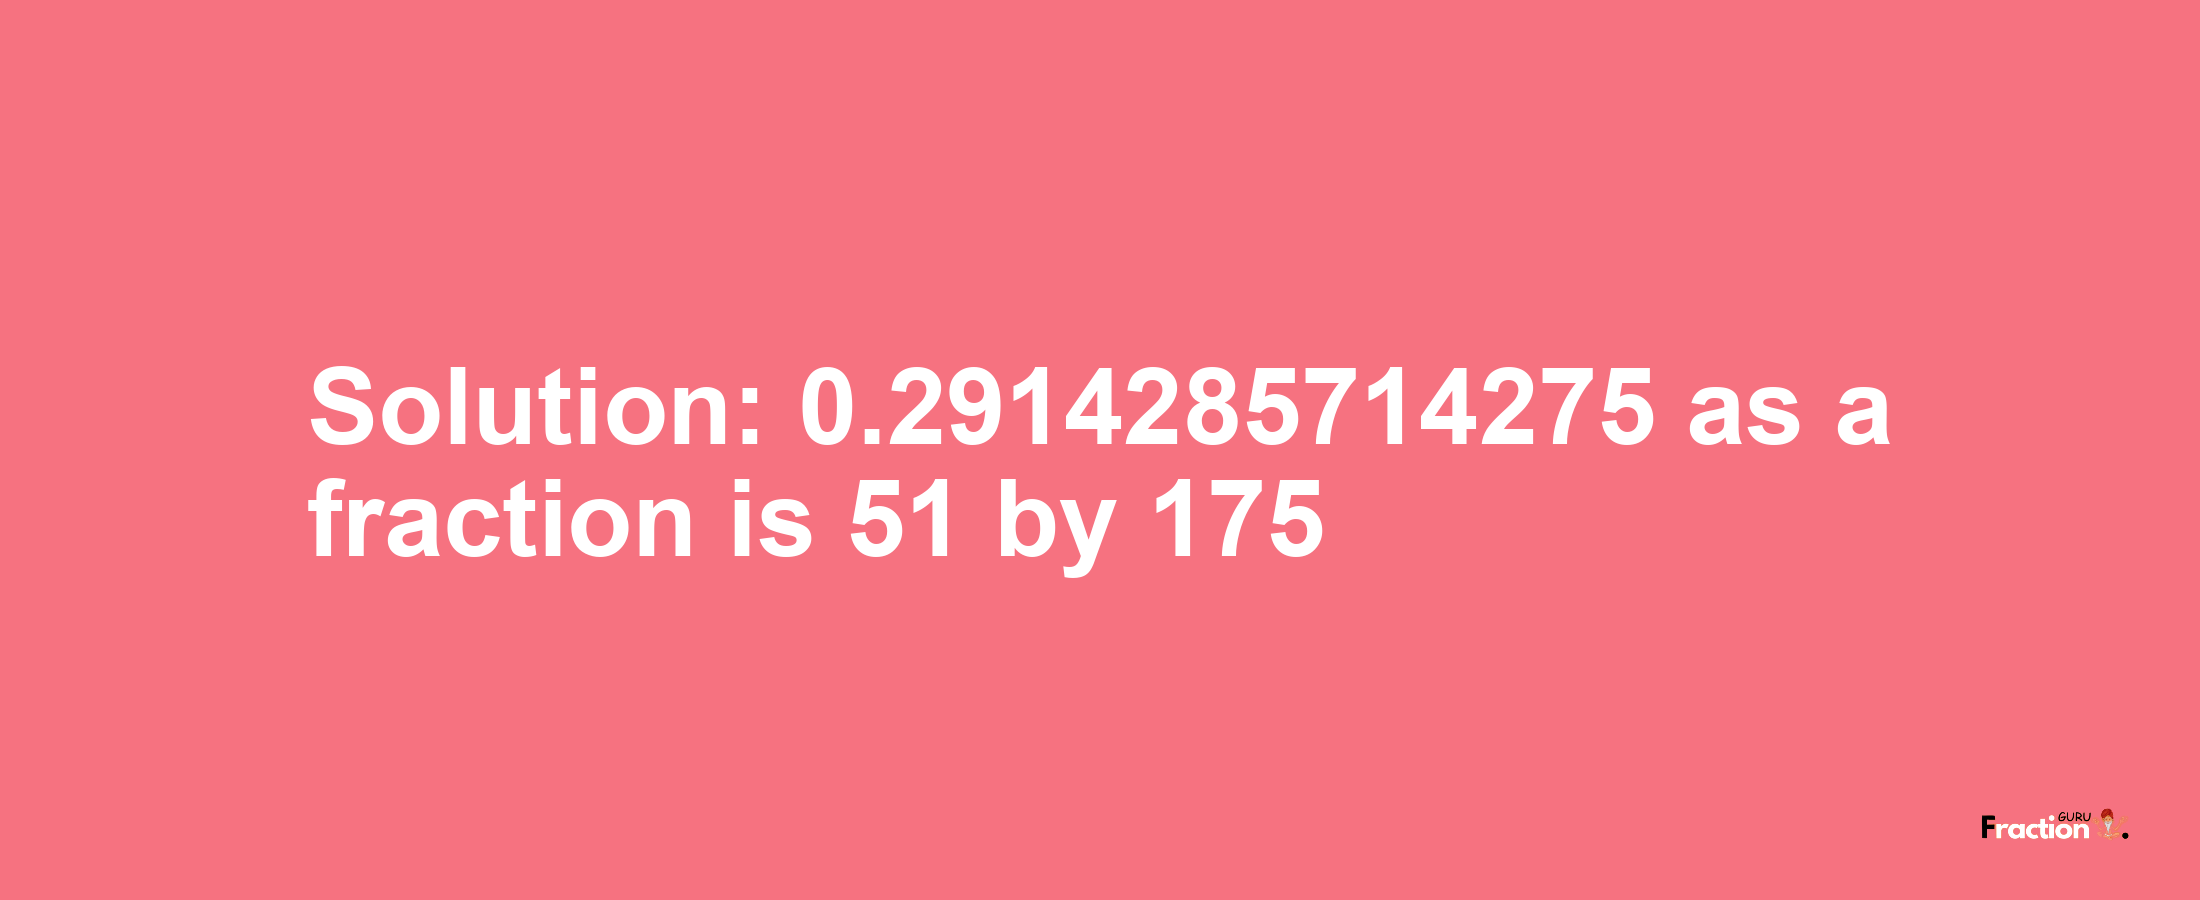 Solution:0.2914285714275 as a fraction is 51/175